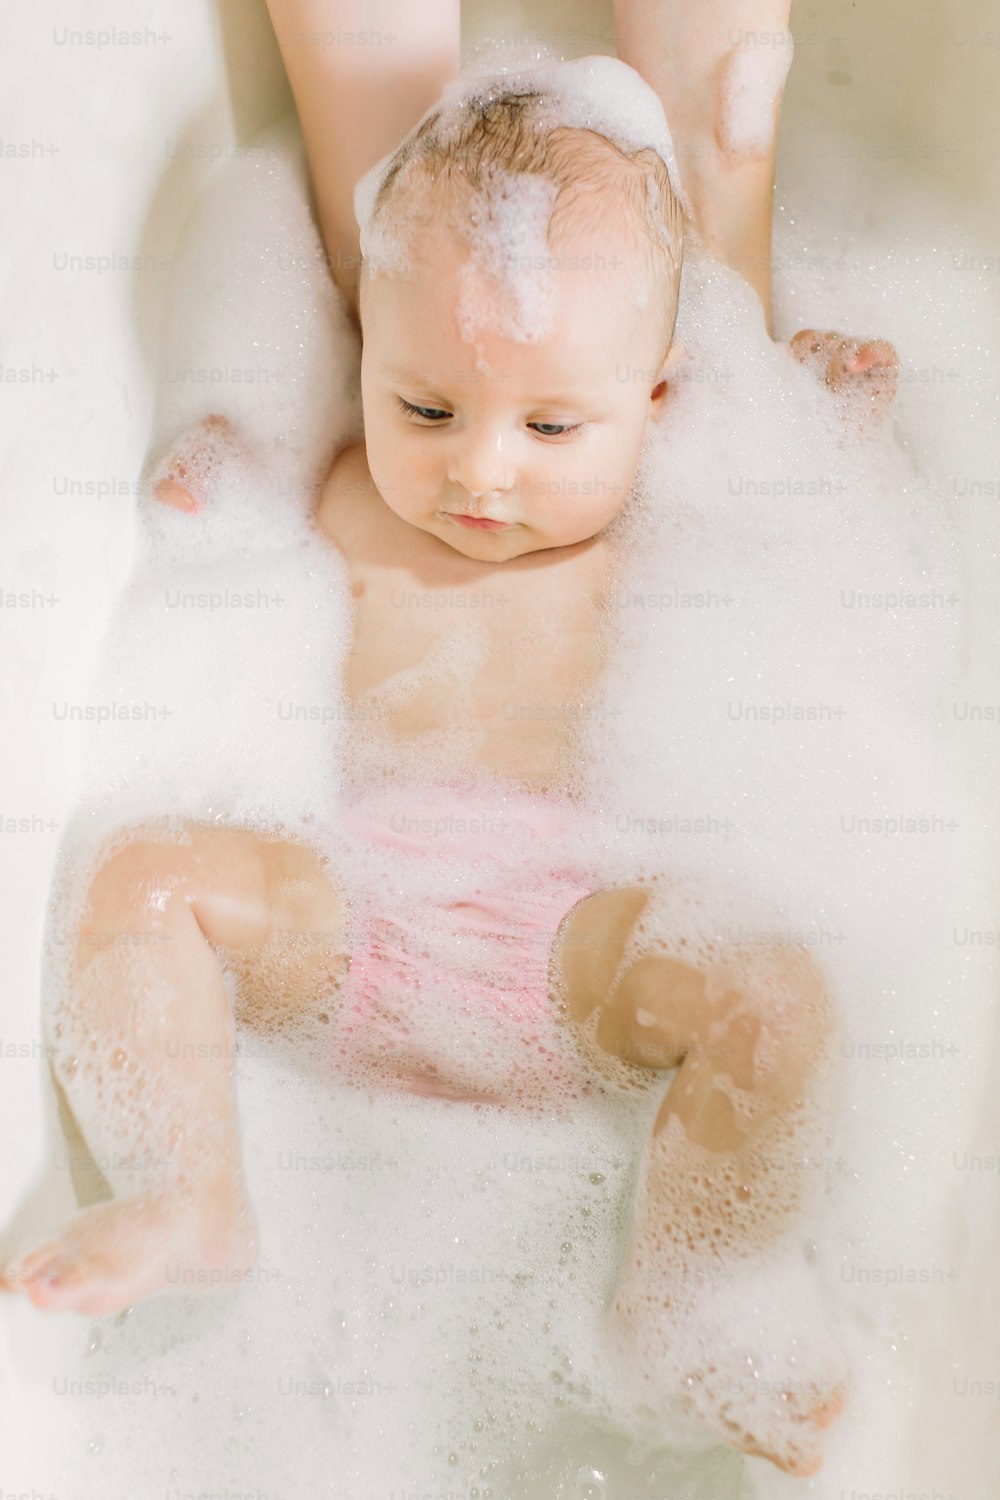 Happy laughing baby taking a bath playing with foam bubbles. Little child in a bathtub. Smiling kid in bathroom with colorful toy duck. Infant washing and bathing. Hygiene and care for young children.